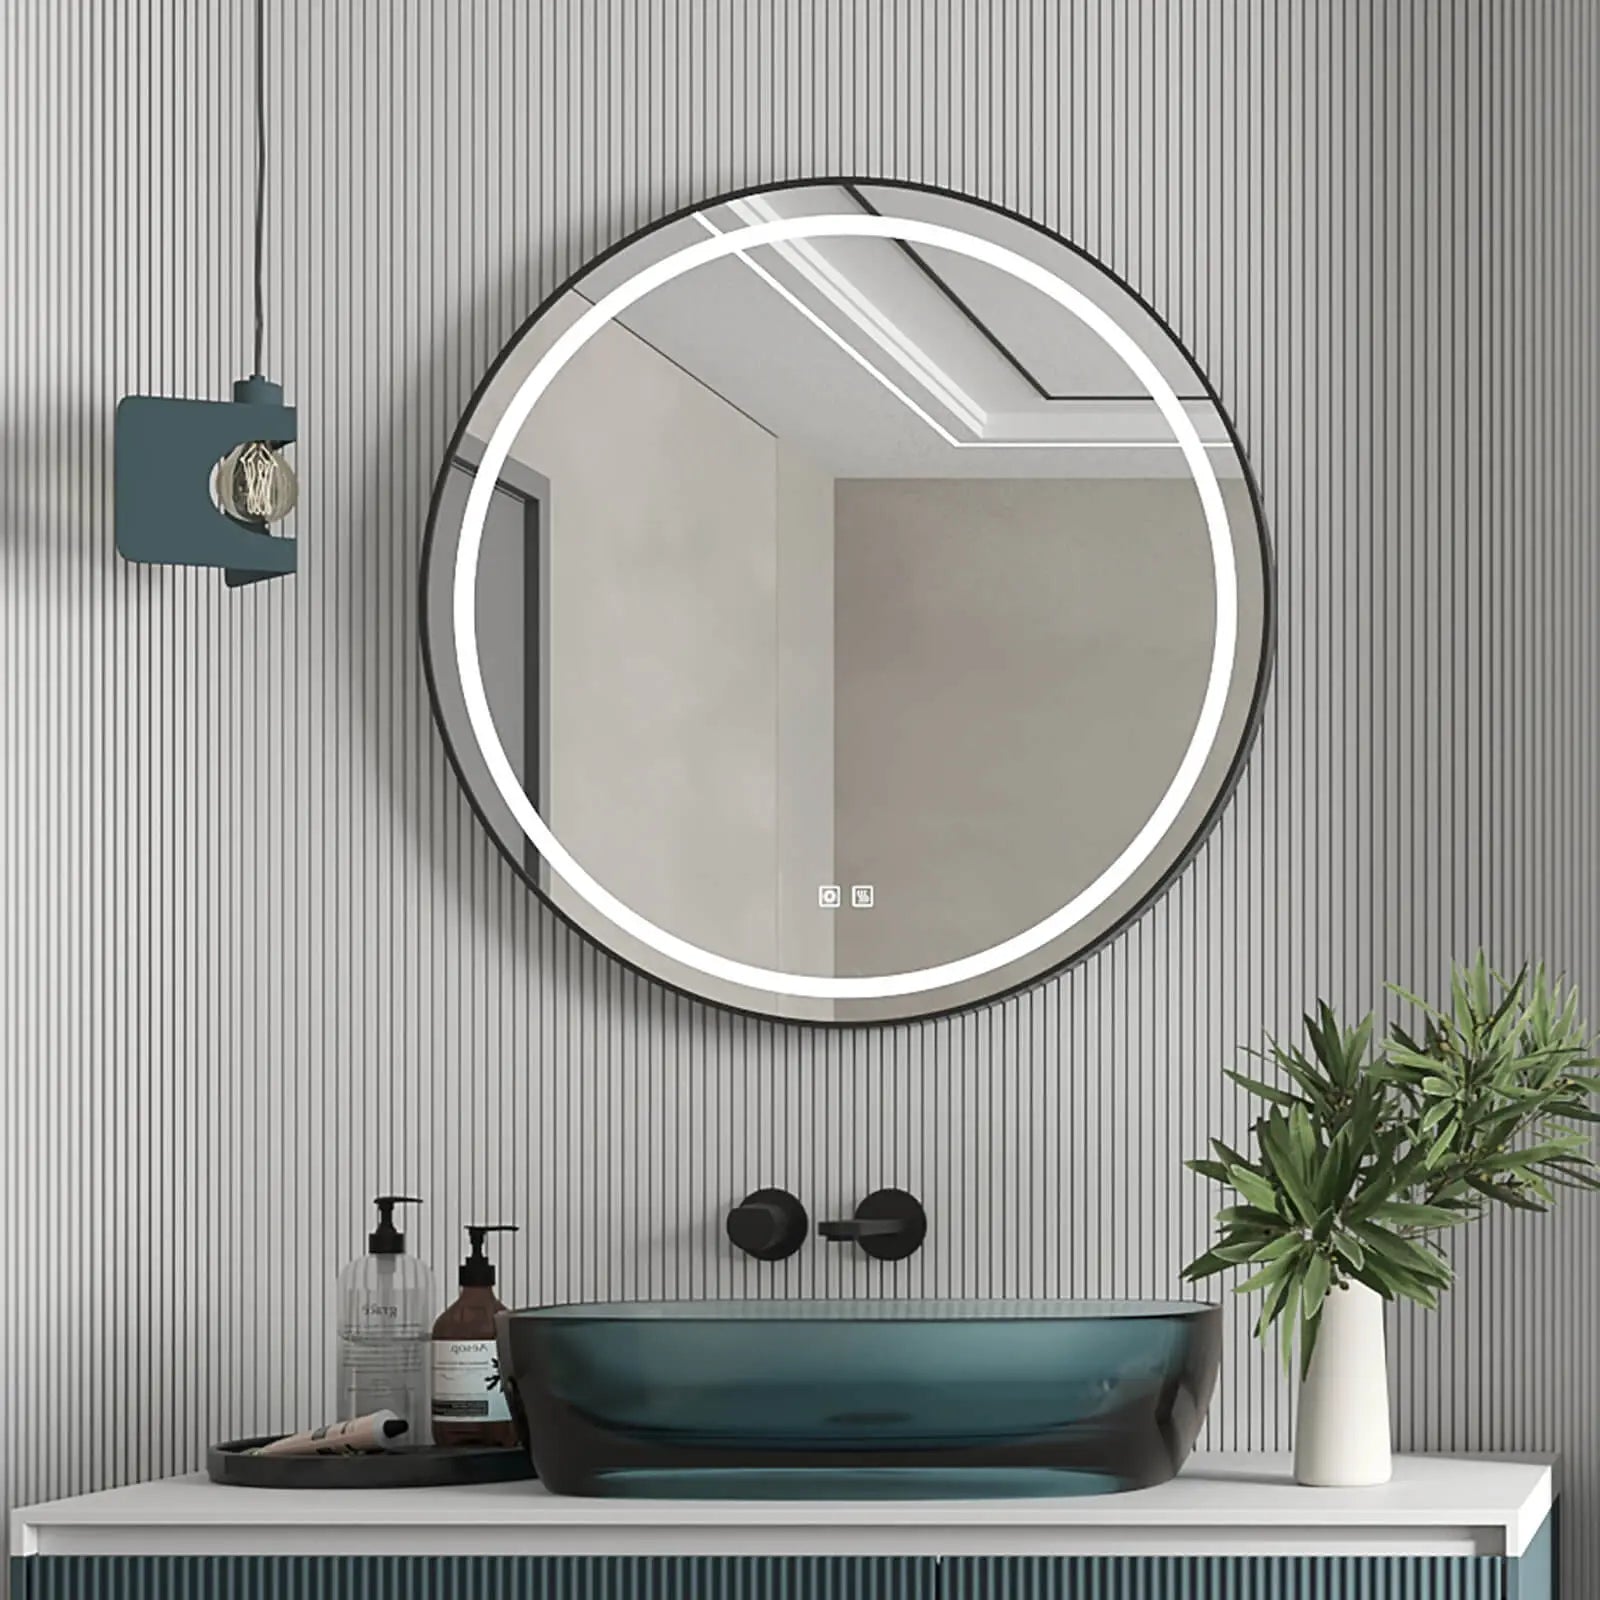 HOROW 32 inch round mirror With Smart Dimming and IP54 Waterproof Model HR-J32R